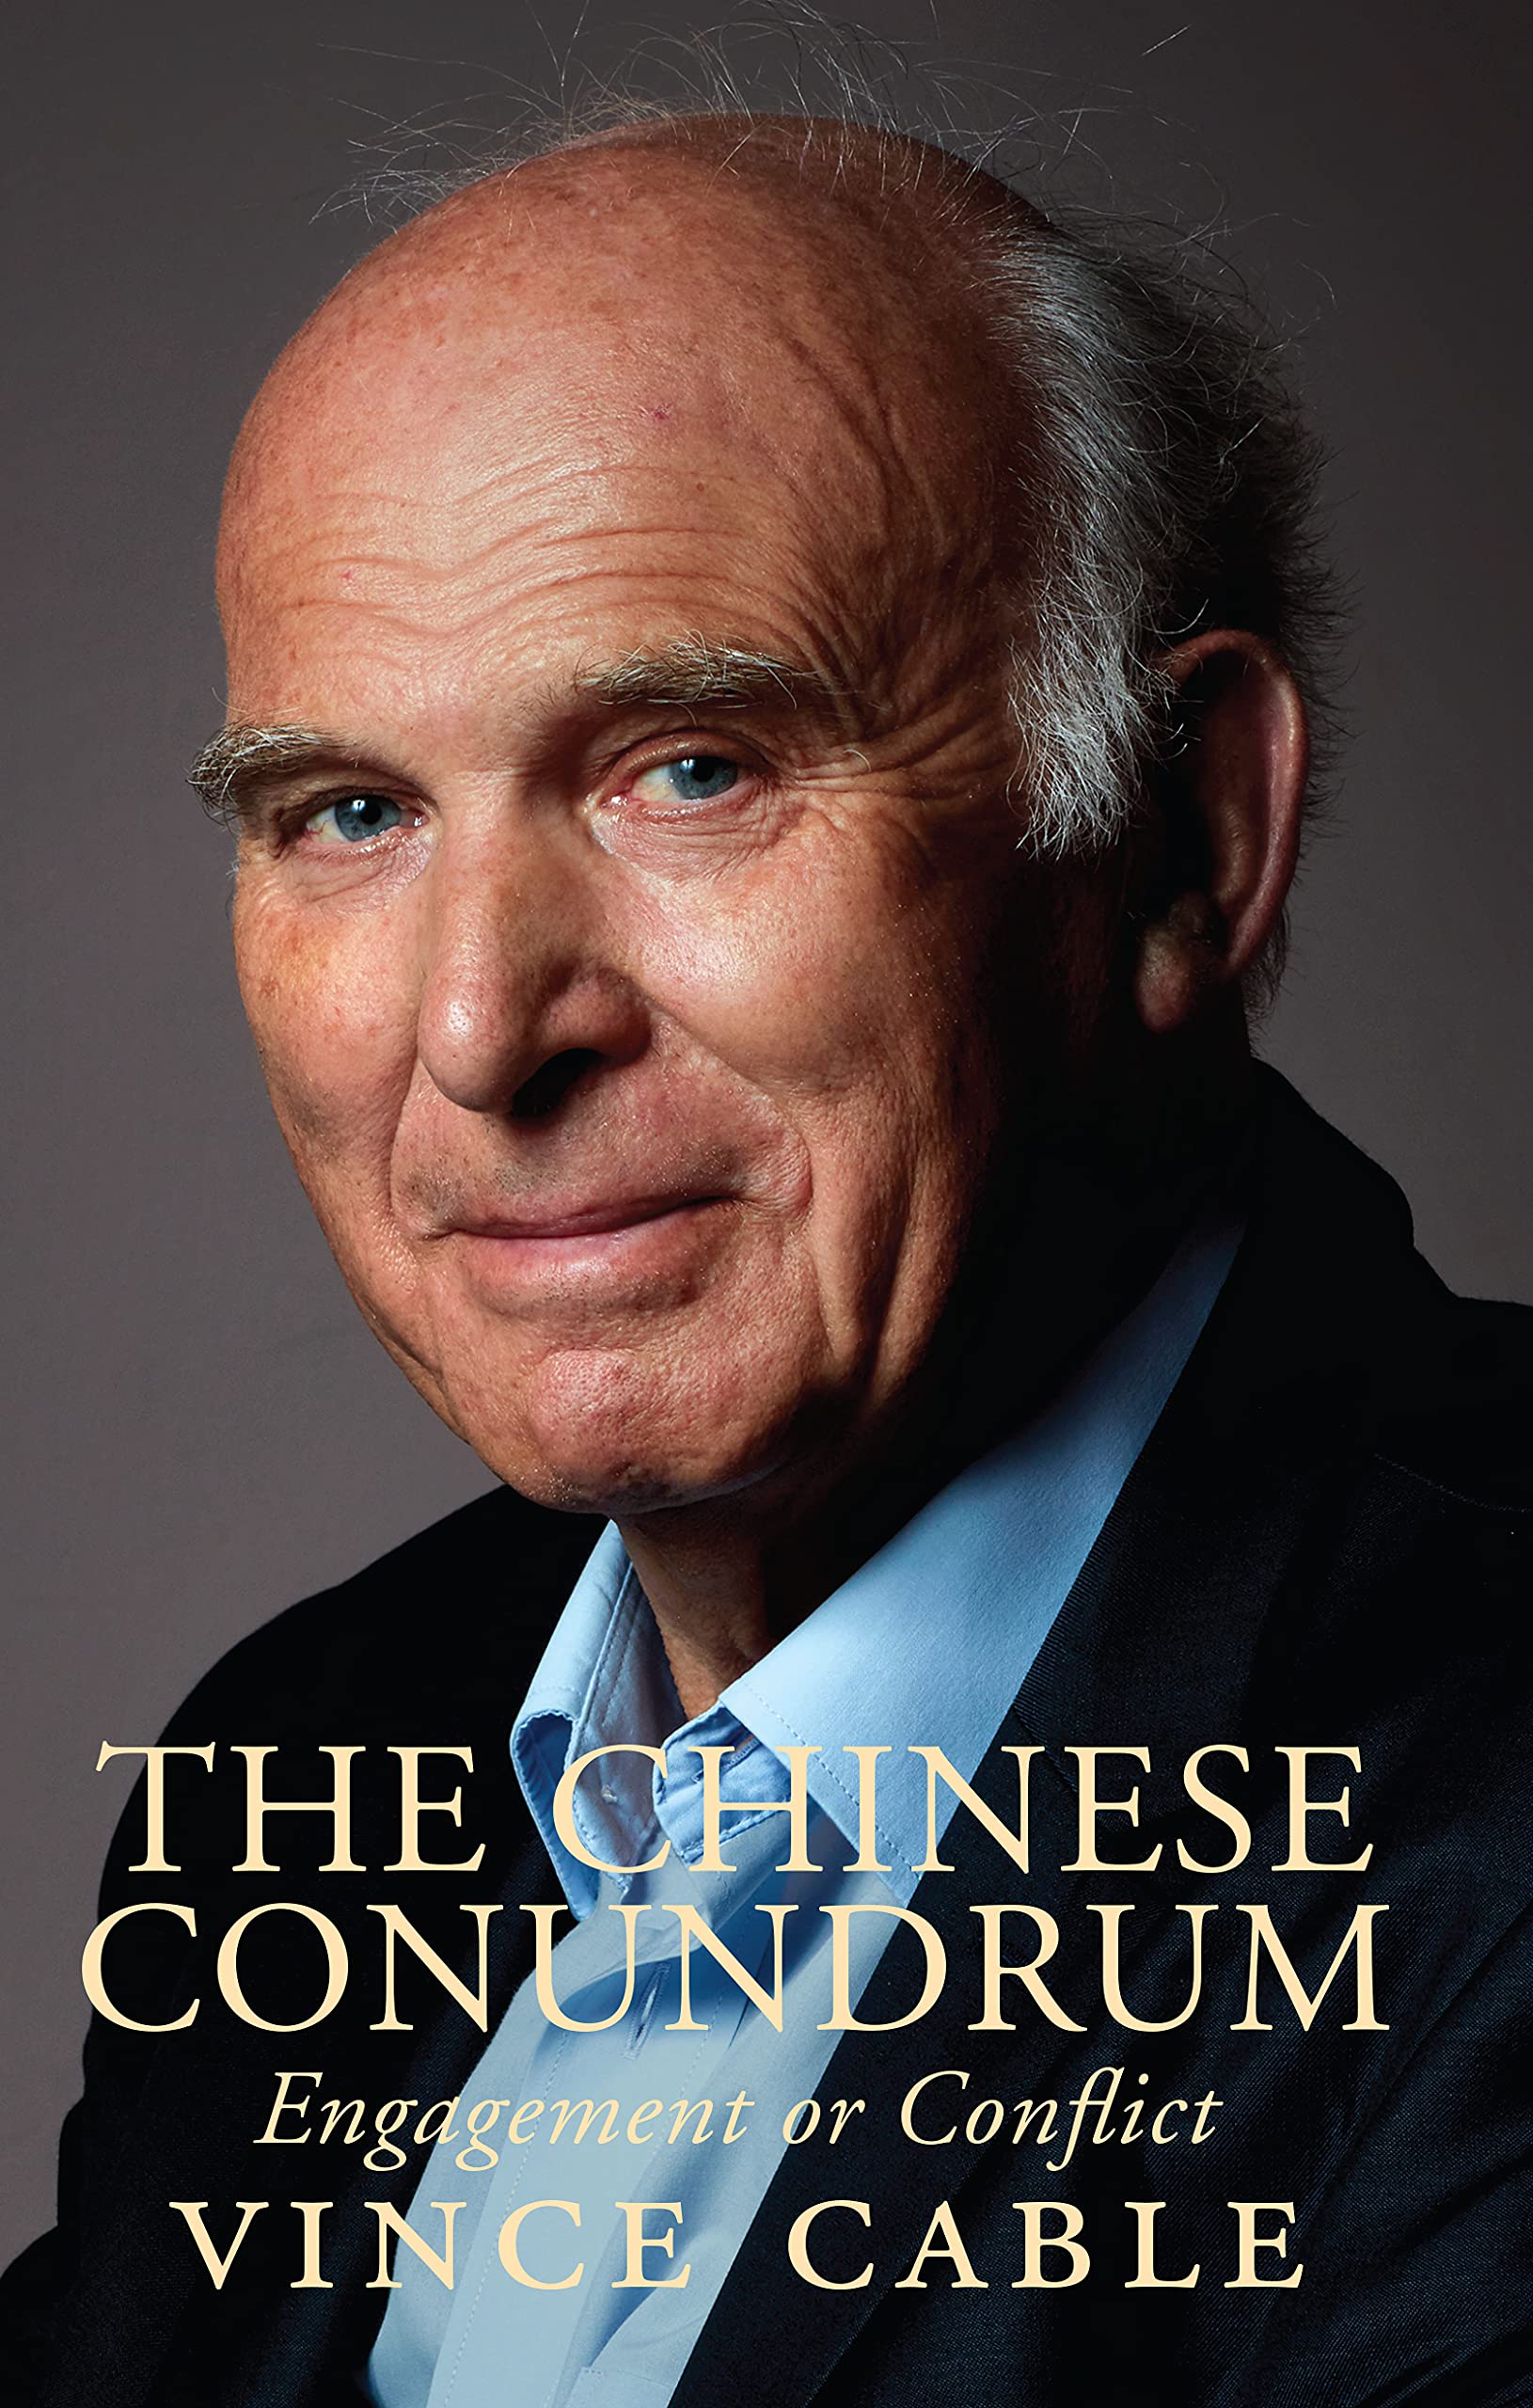 The Chinese Conundrum | Vince Cable